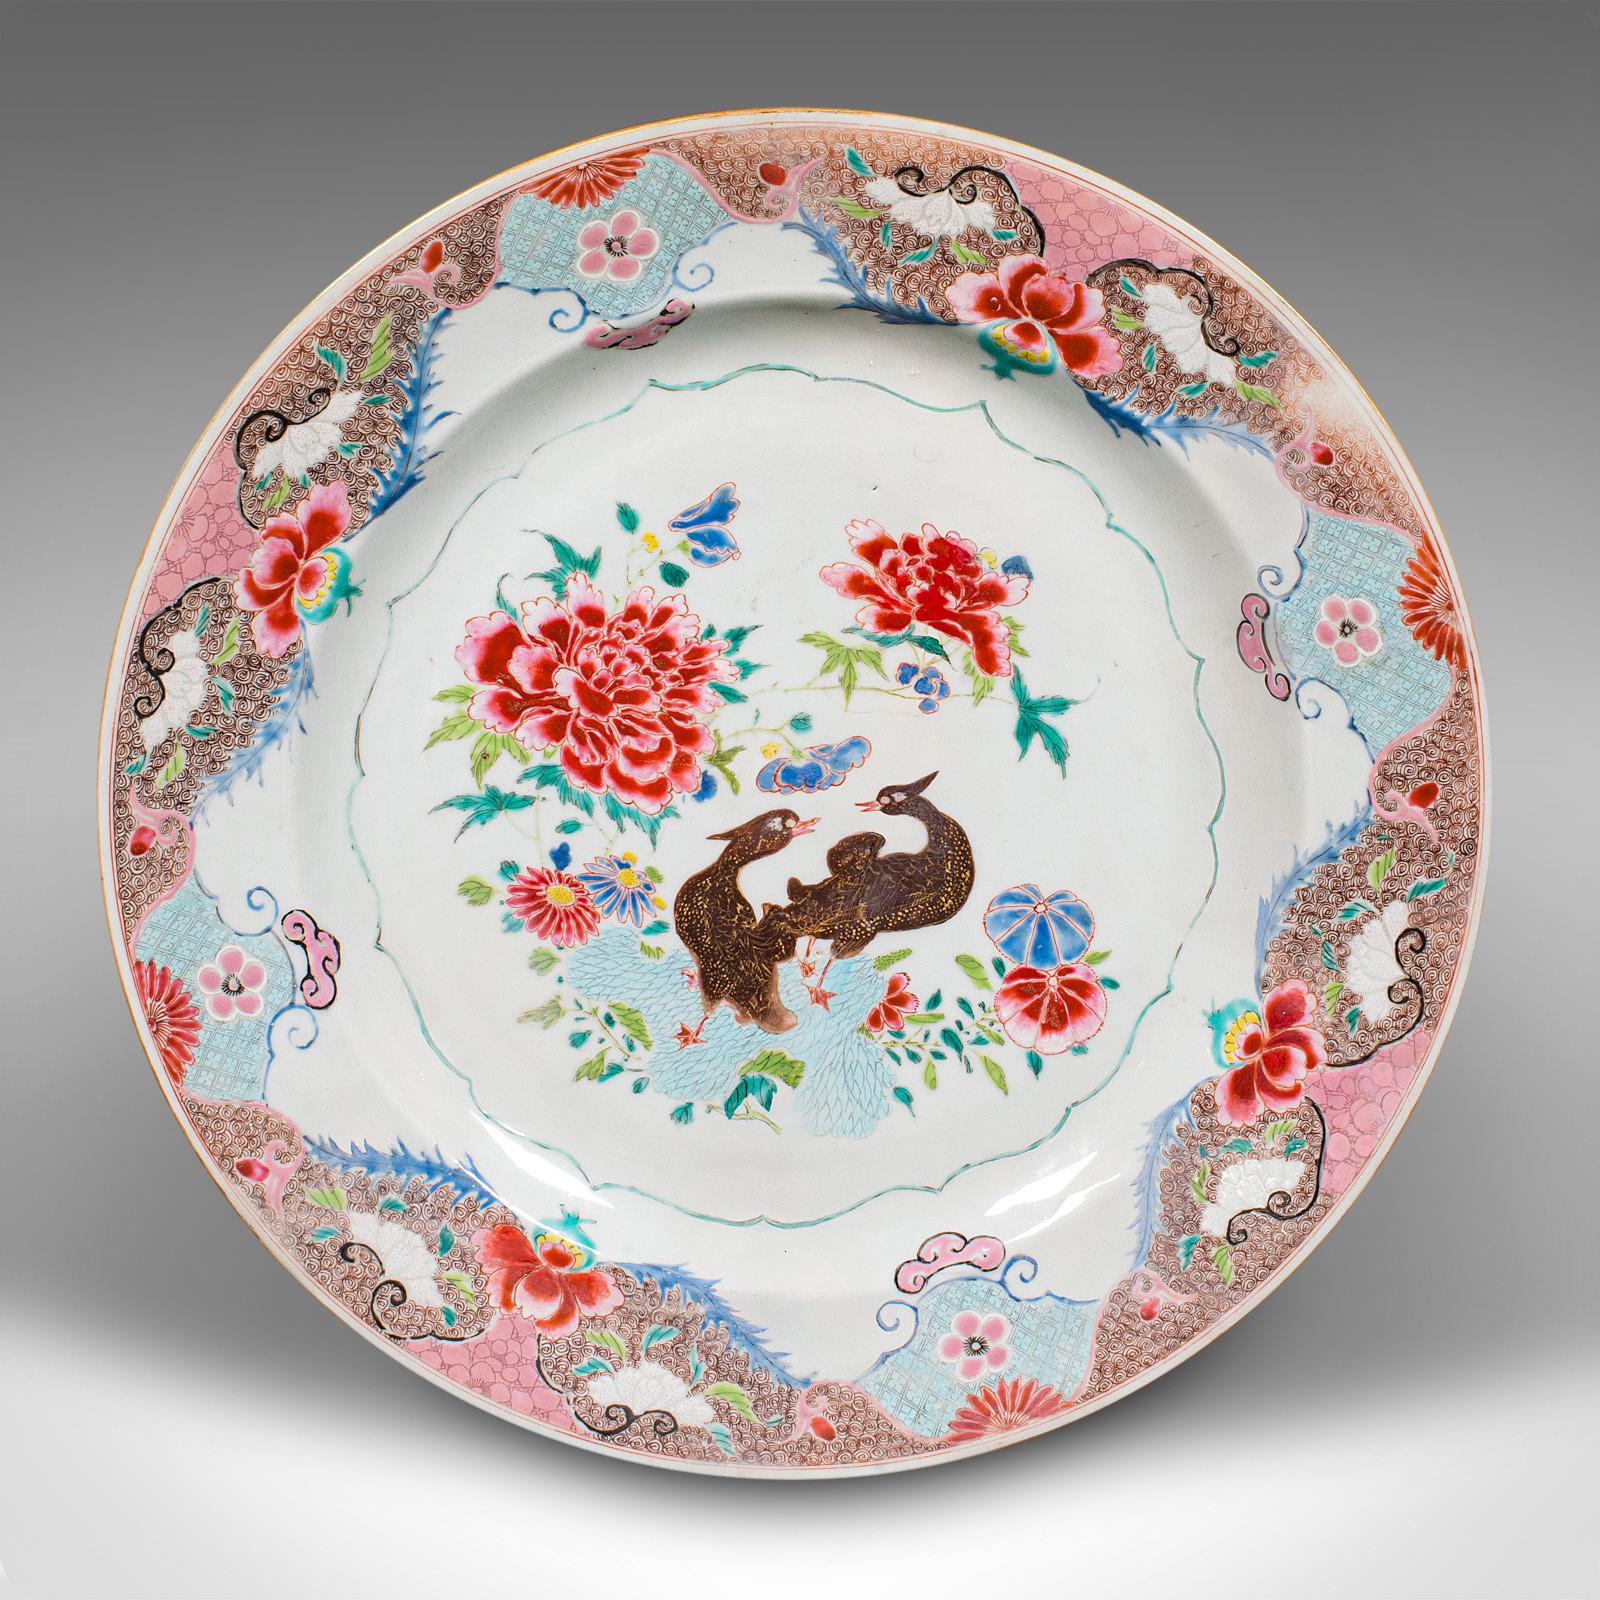 This is a large antique decorative charger. A Japanese, ceramic serving plate, dating to the early 20th century, circa 1920.

Pleasing coloration and of a generous serving size
Display a desirable aged patina throughout
Quality ceramic presents a